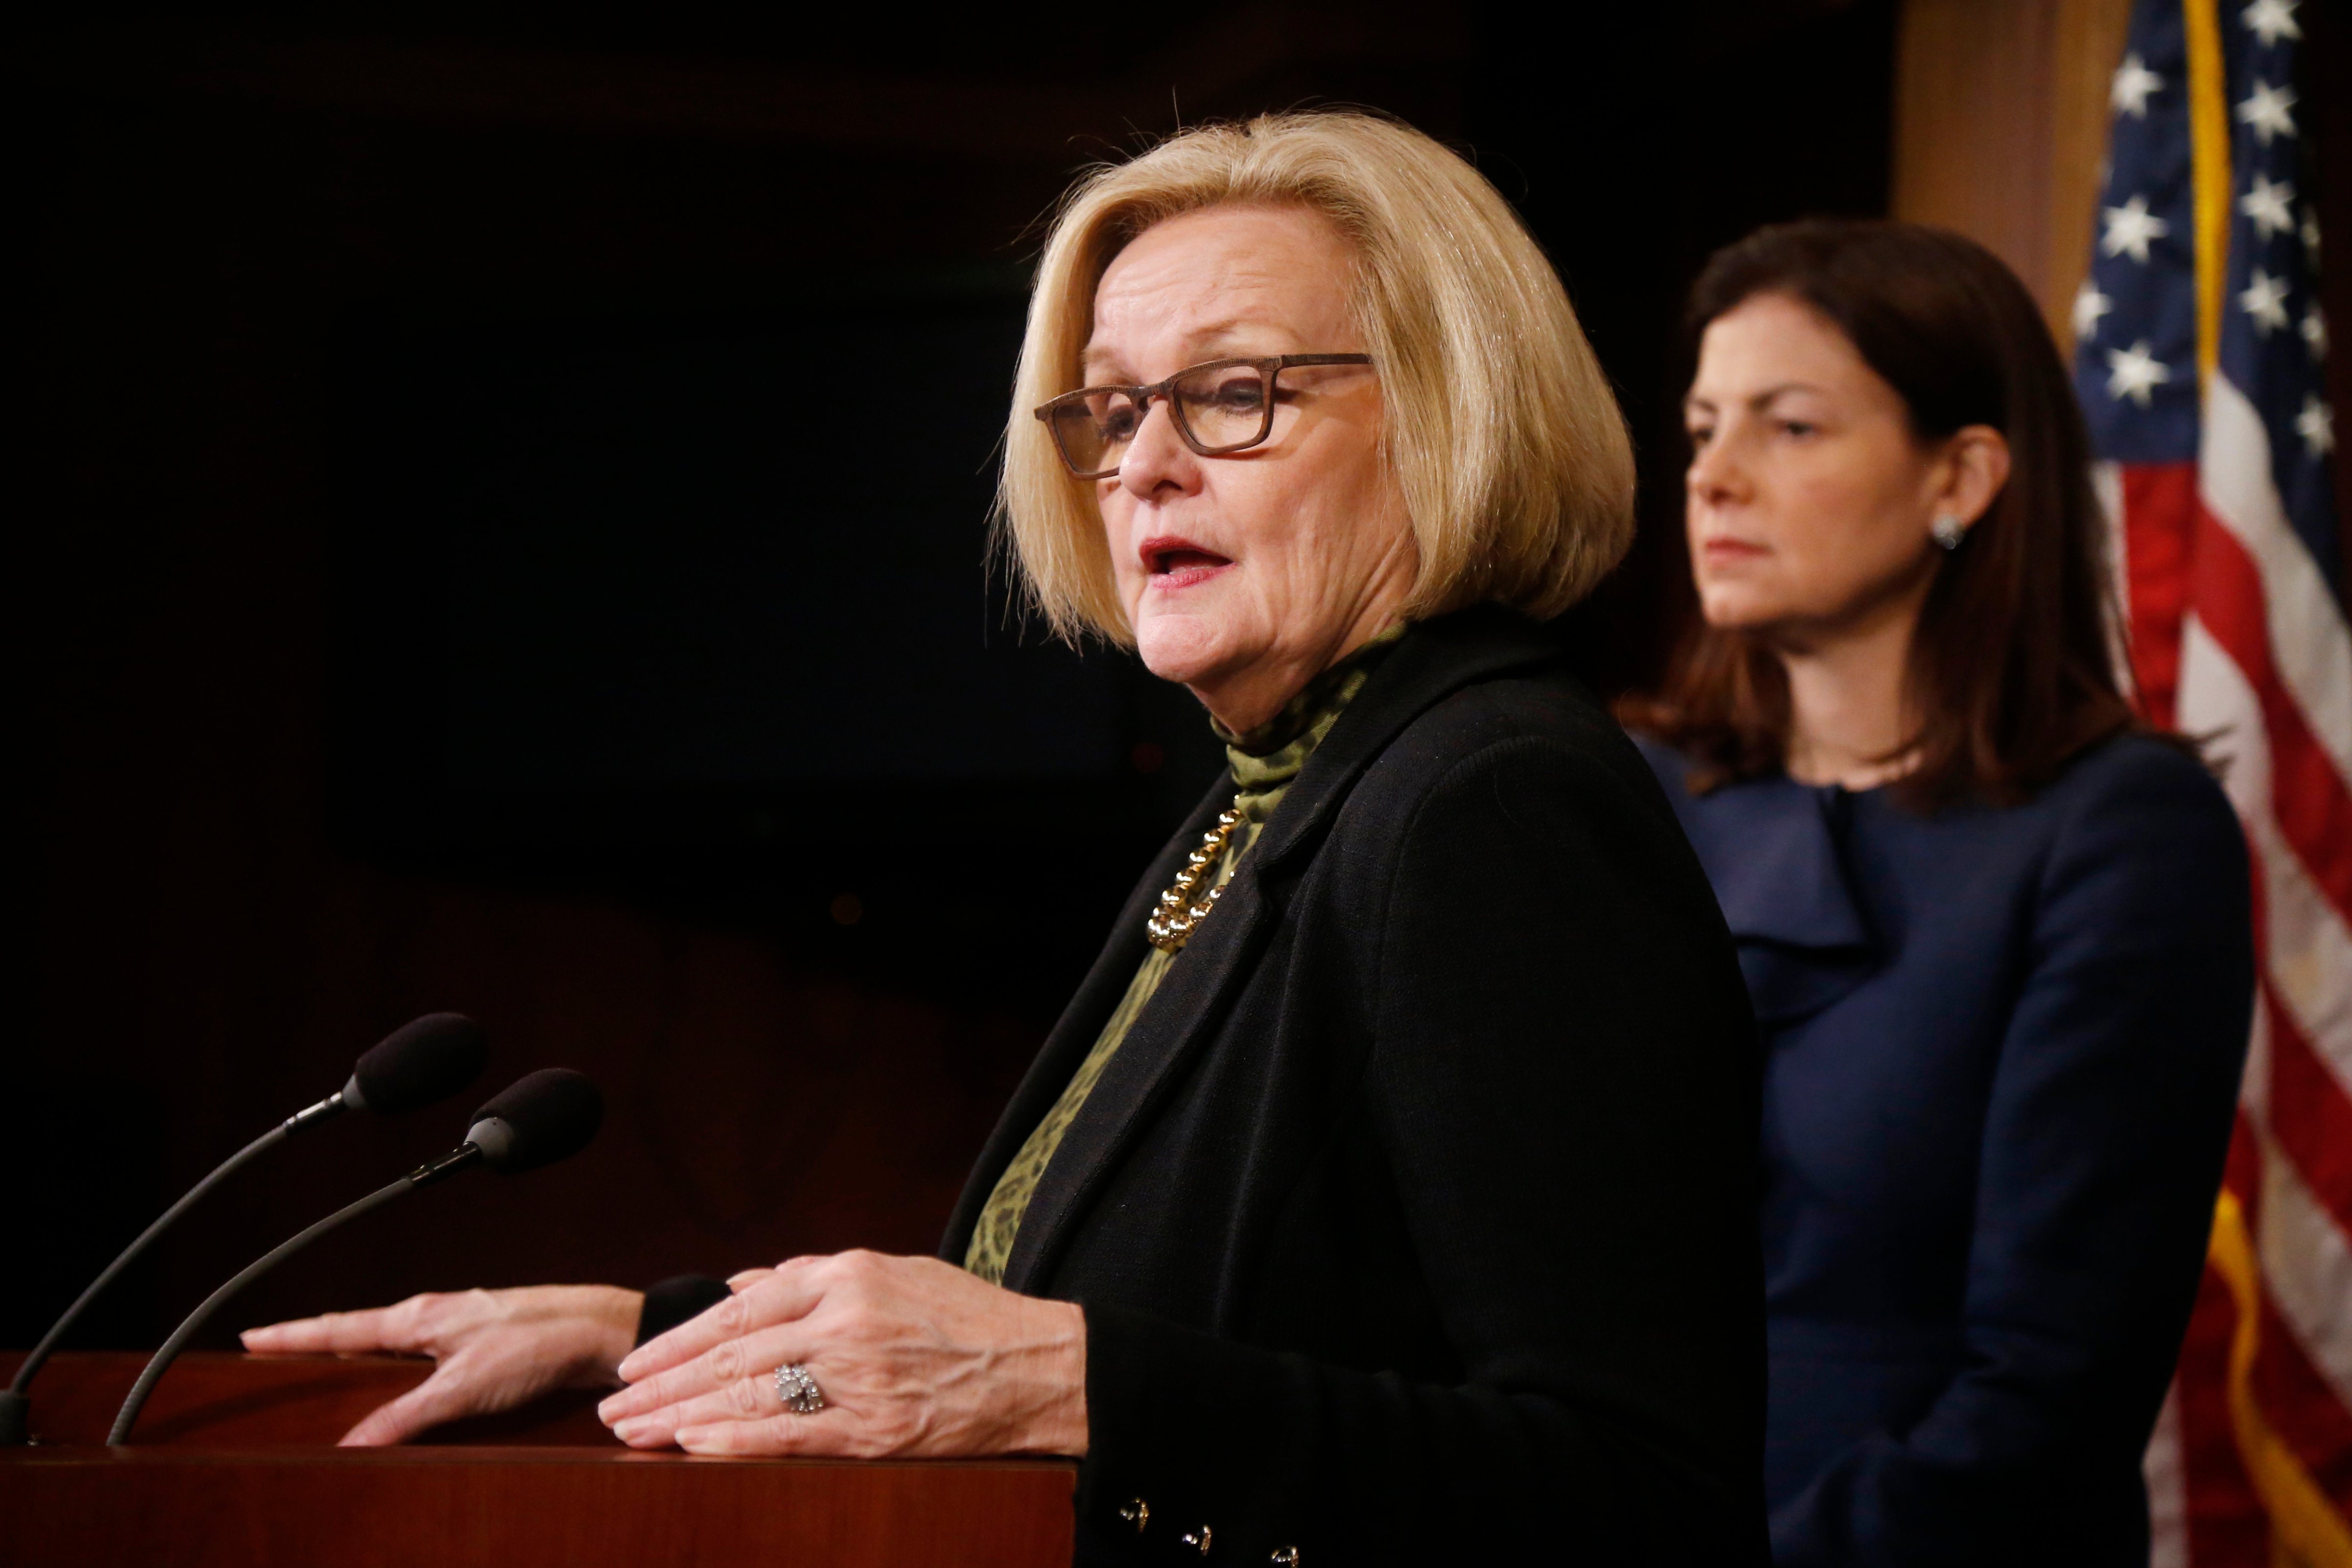 Senator Claire McCaskill and Senator Kelly Ayotte at a news conference on Capitol Hill in Washington, D.C., on March 6, 2014, following a Senate vote on military sexual assaults. (Charles Dharapak—AP)